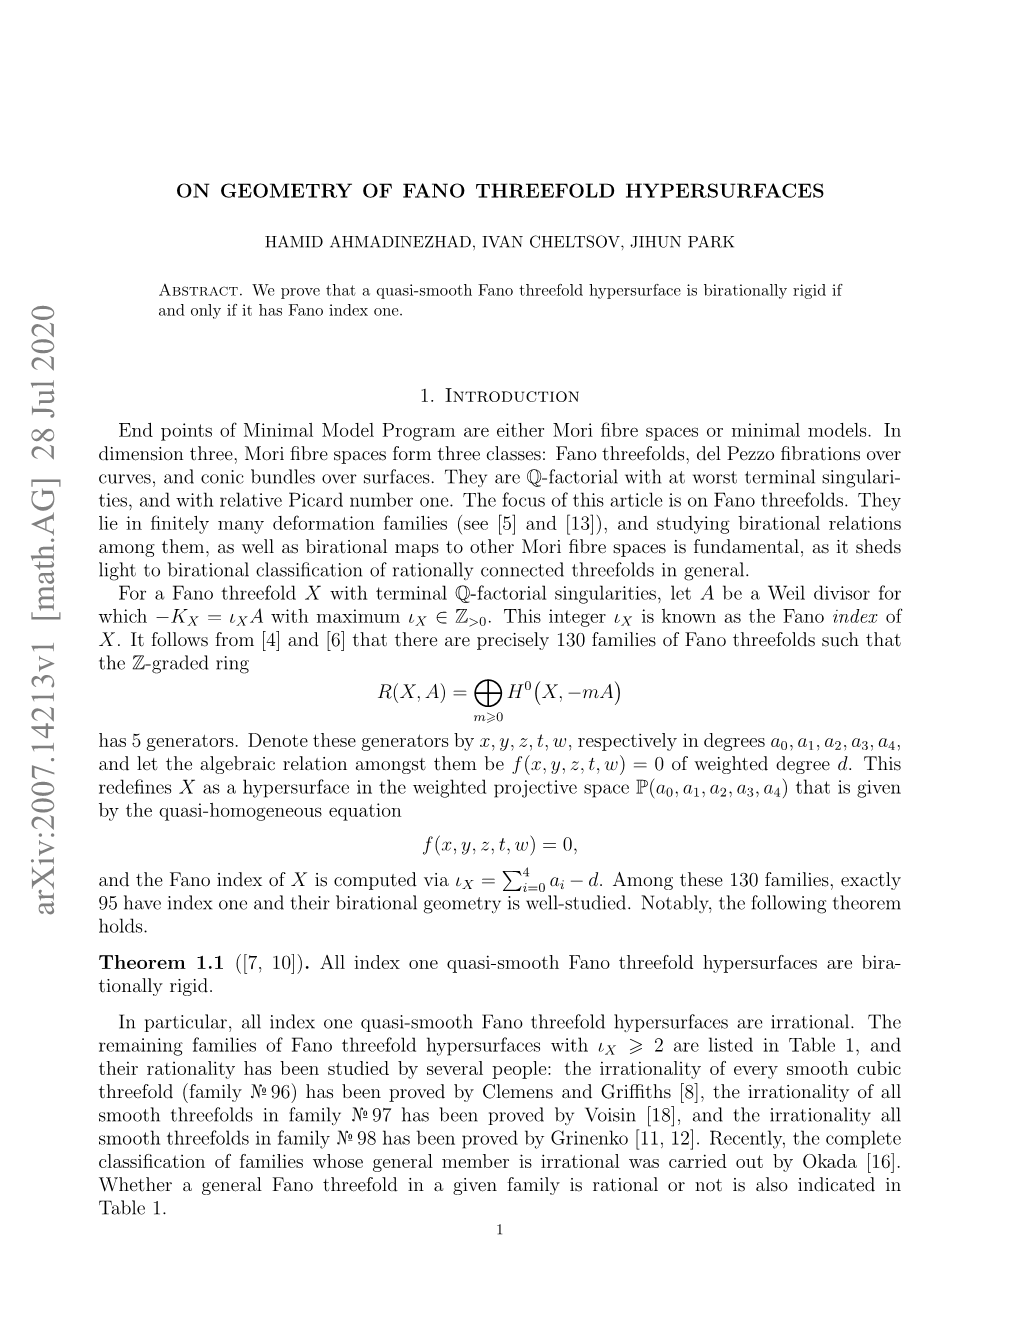 On Geometry of Fano Threefold Hypersurfaces 3